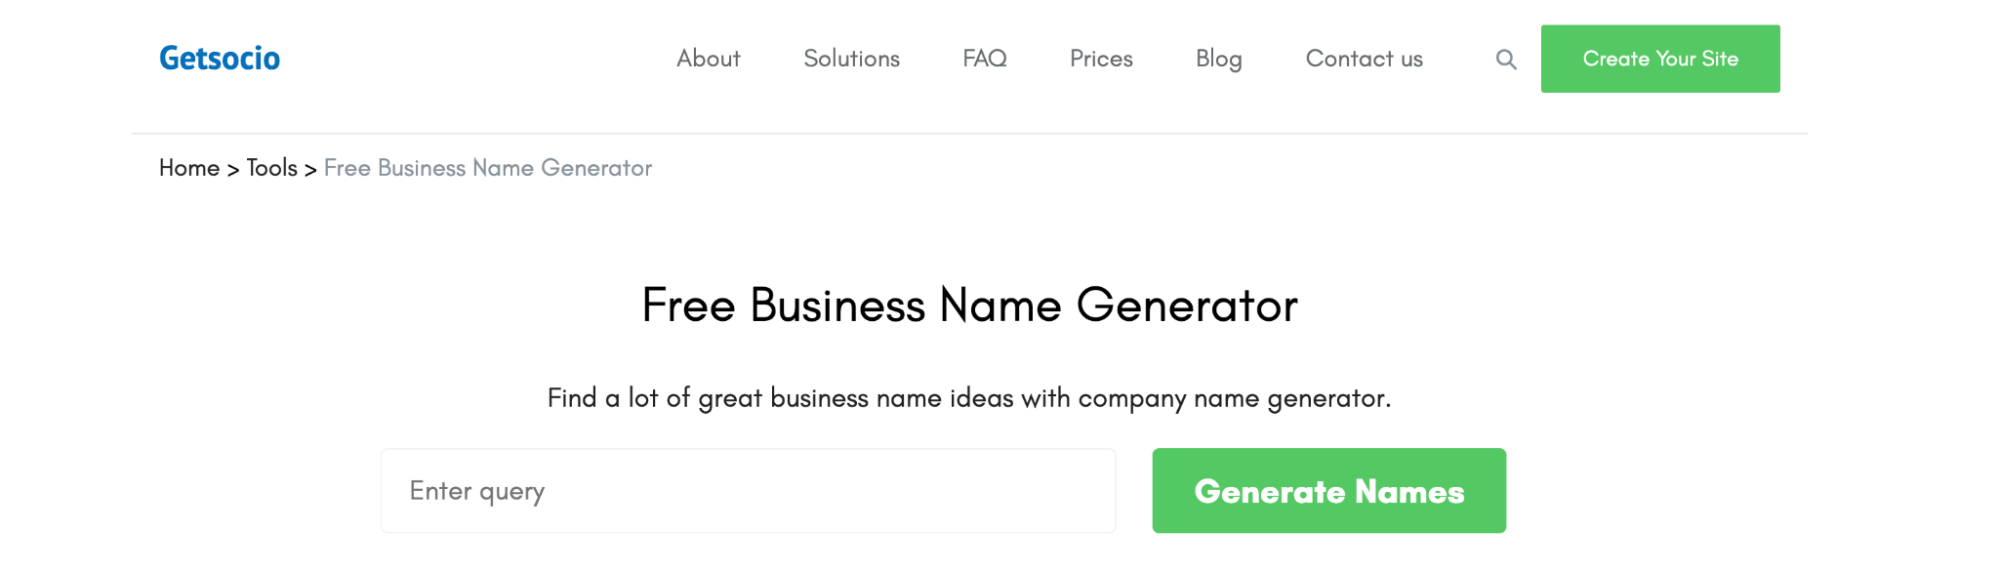 Getsocio free business name generator with search bar and button to generate names.